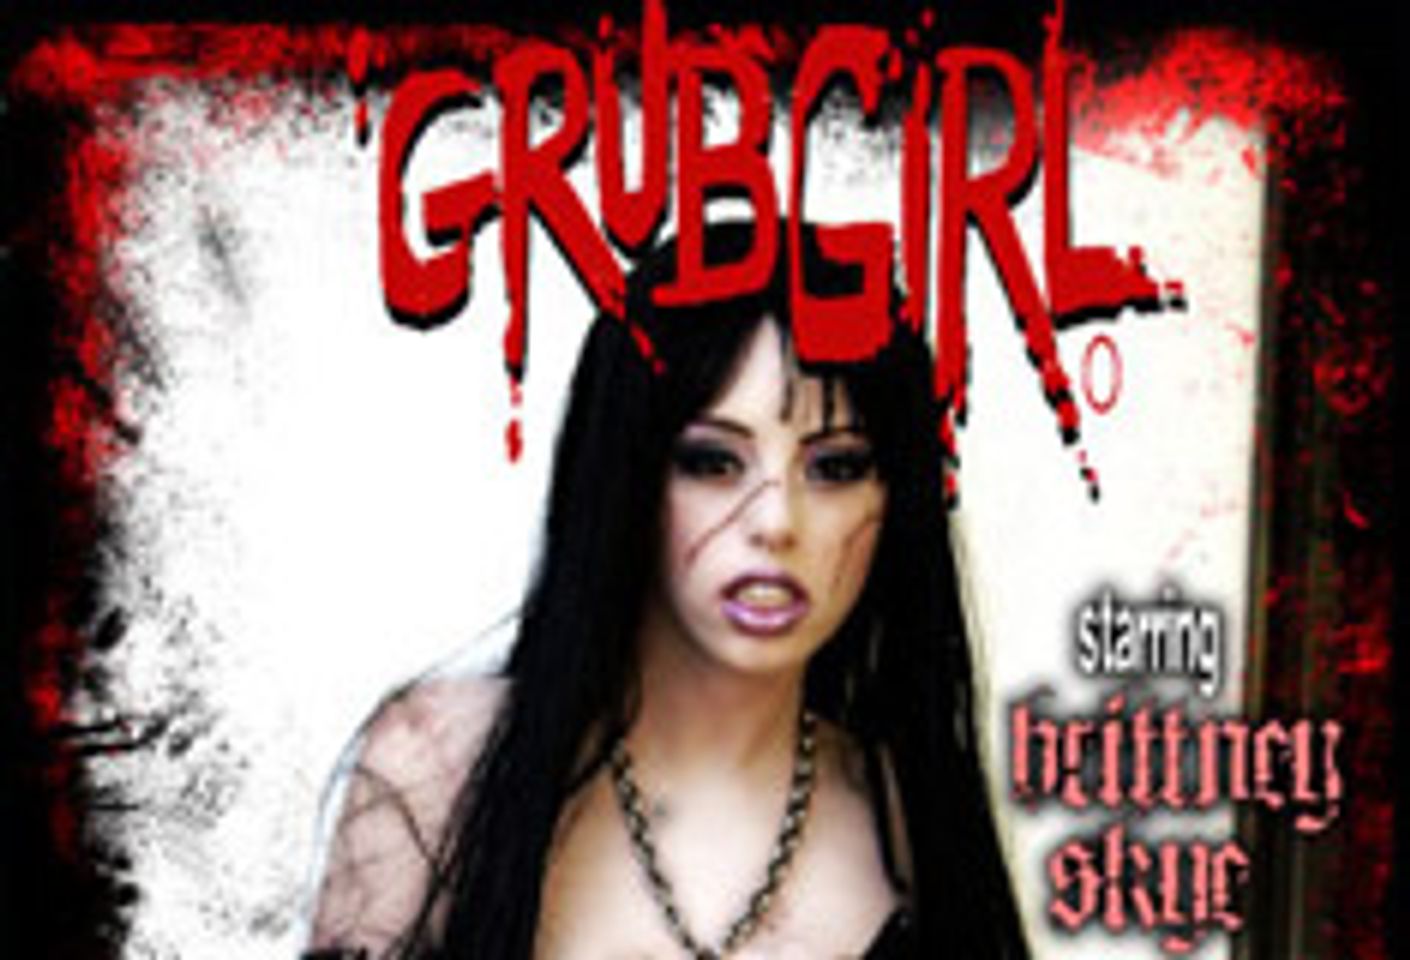 Northstar to Throw <i>Grub Girl</i> Release Party